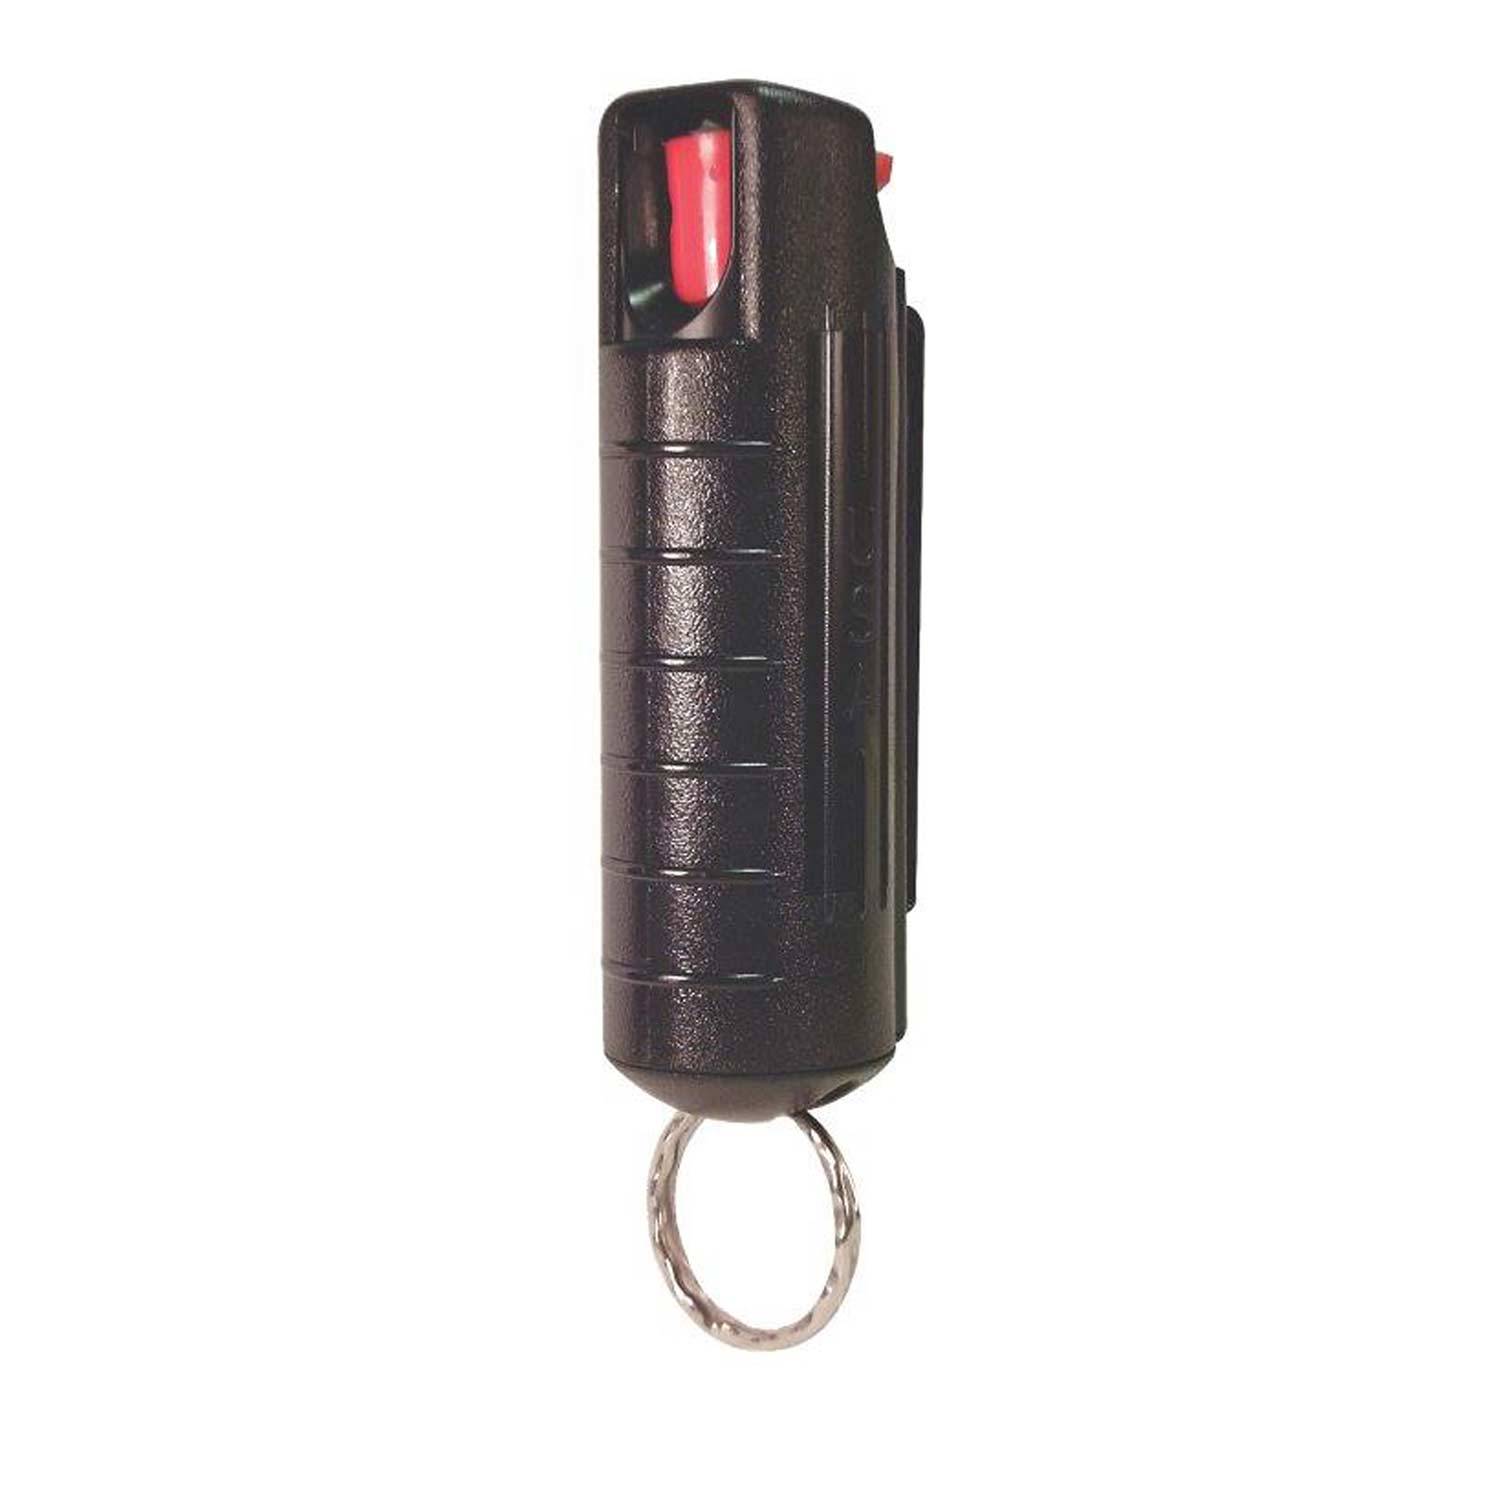 PERSONAL SECURITY PRODUCTS 1/2 OZ. PEPPER SPRAY W/ HARD CASE